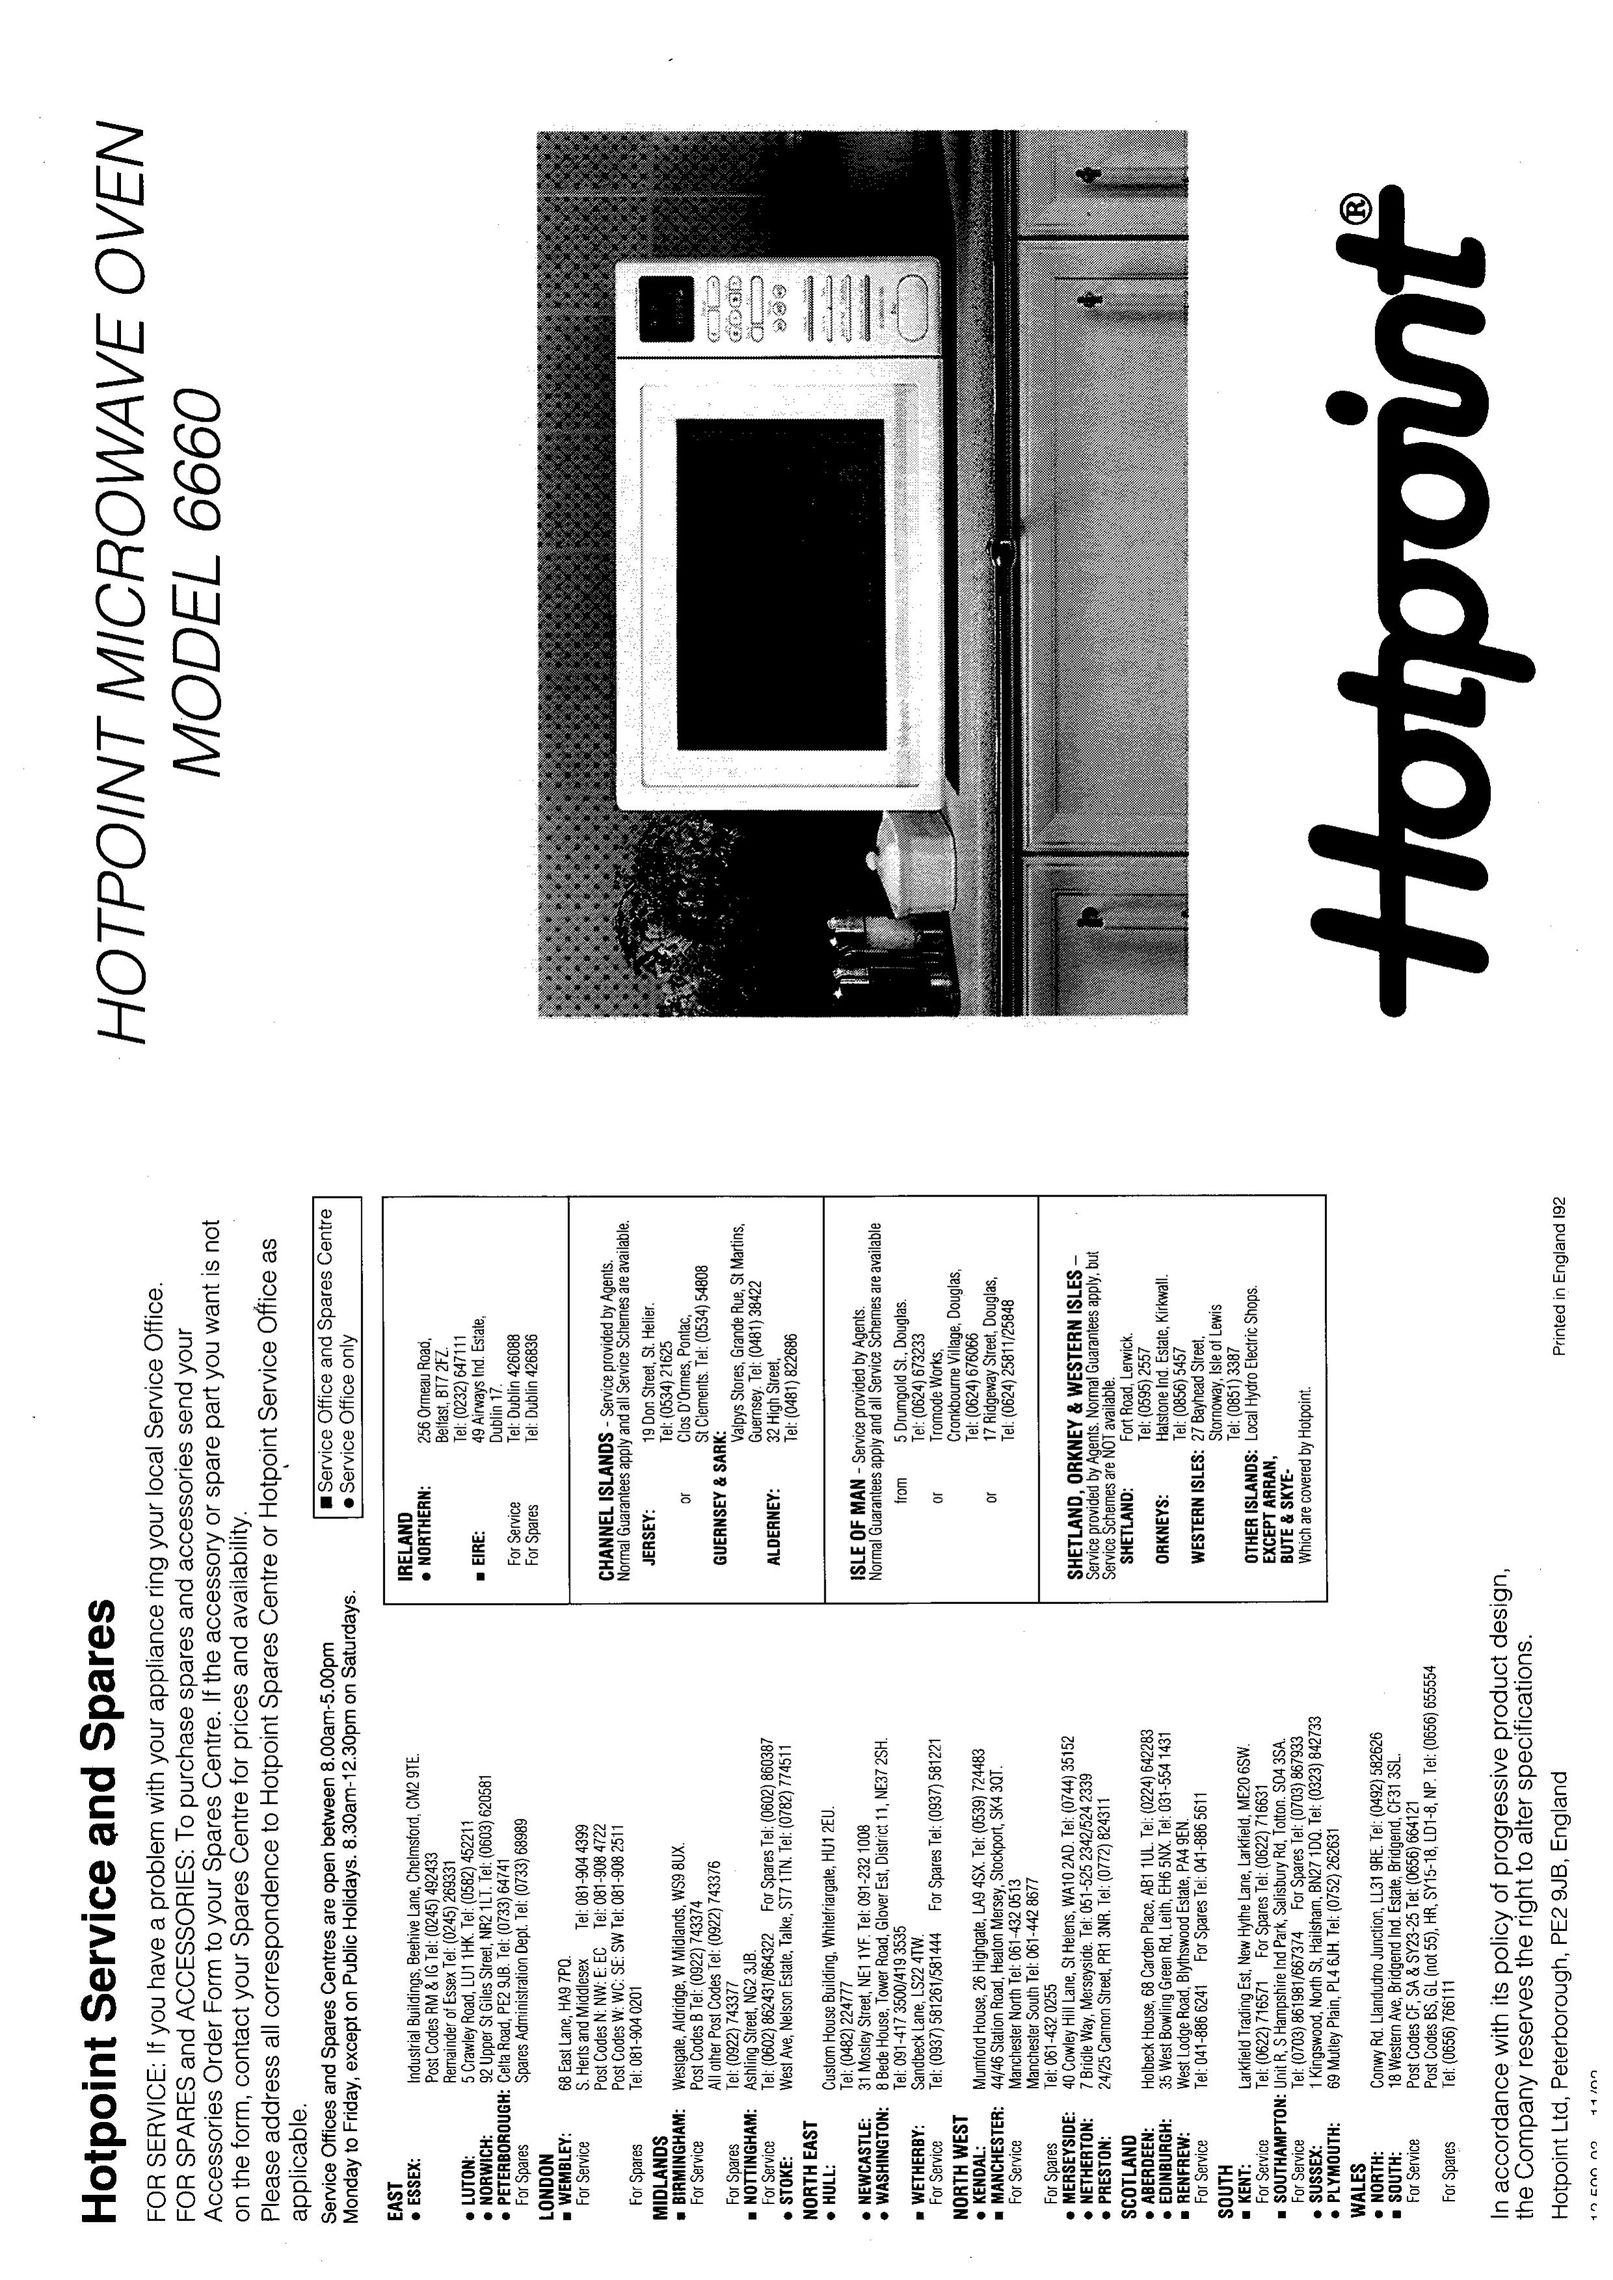 Hotpoint 6660 Microwave Oven User Manual